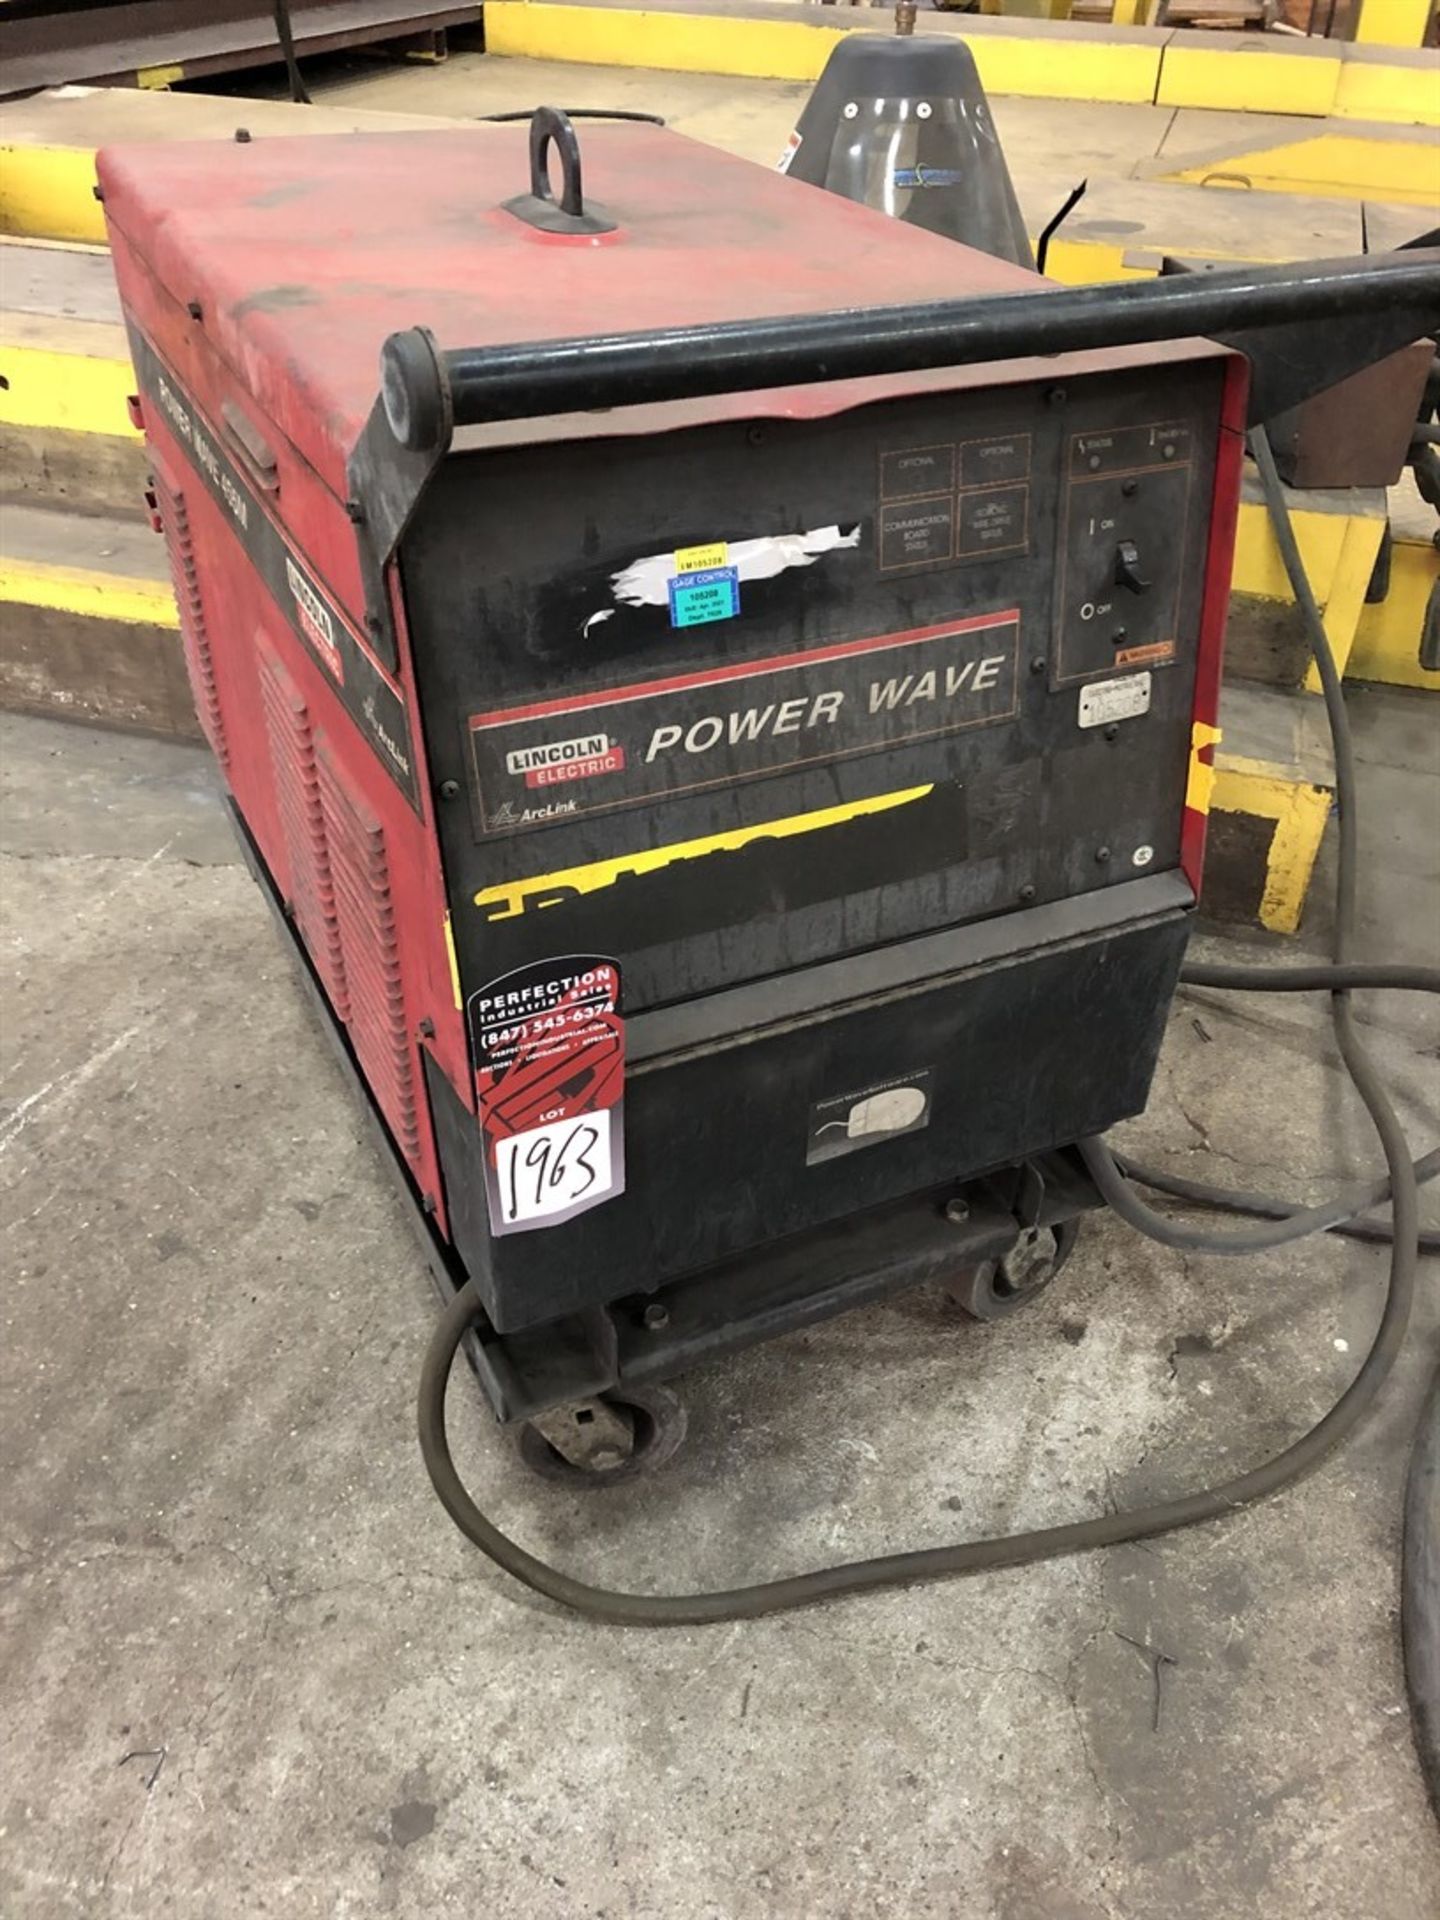 LINCOLN POWER WAVE 455M MIG Welding Power Source, w/ Lincoln POWERFEED 10M Wire Feed, on Free